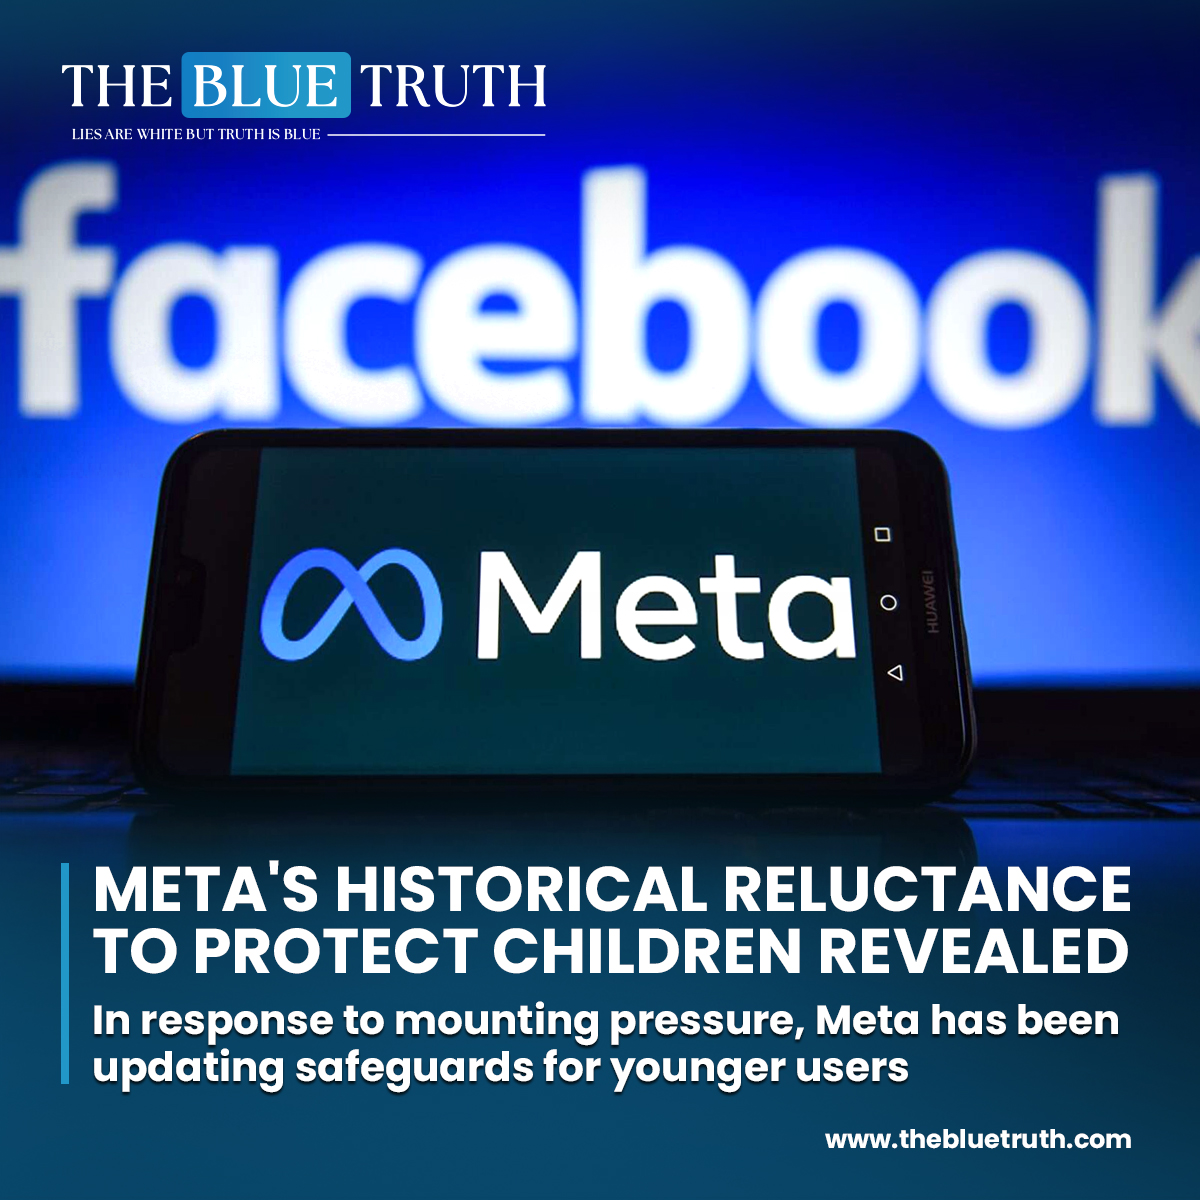 Newly revealed documents from New Mexico's legal action against Meta, the parent company of Facebook and Instagram.
#Meta #ChildSafety #OnlineProtection #DigitalEthics #SocialMediaResponsibility
#TechTransparency #tbt #TheBlueTruth